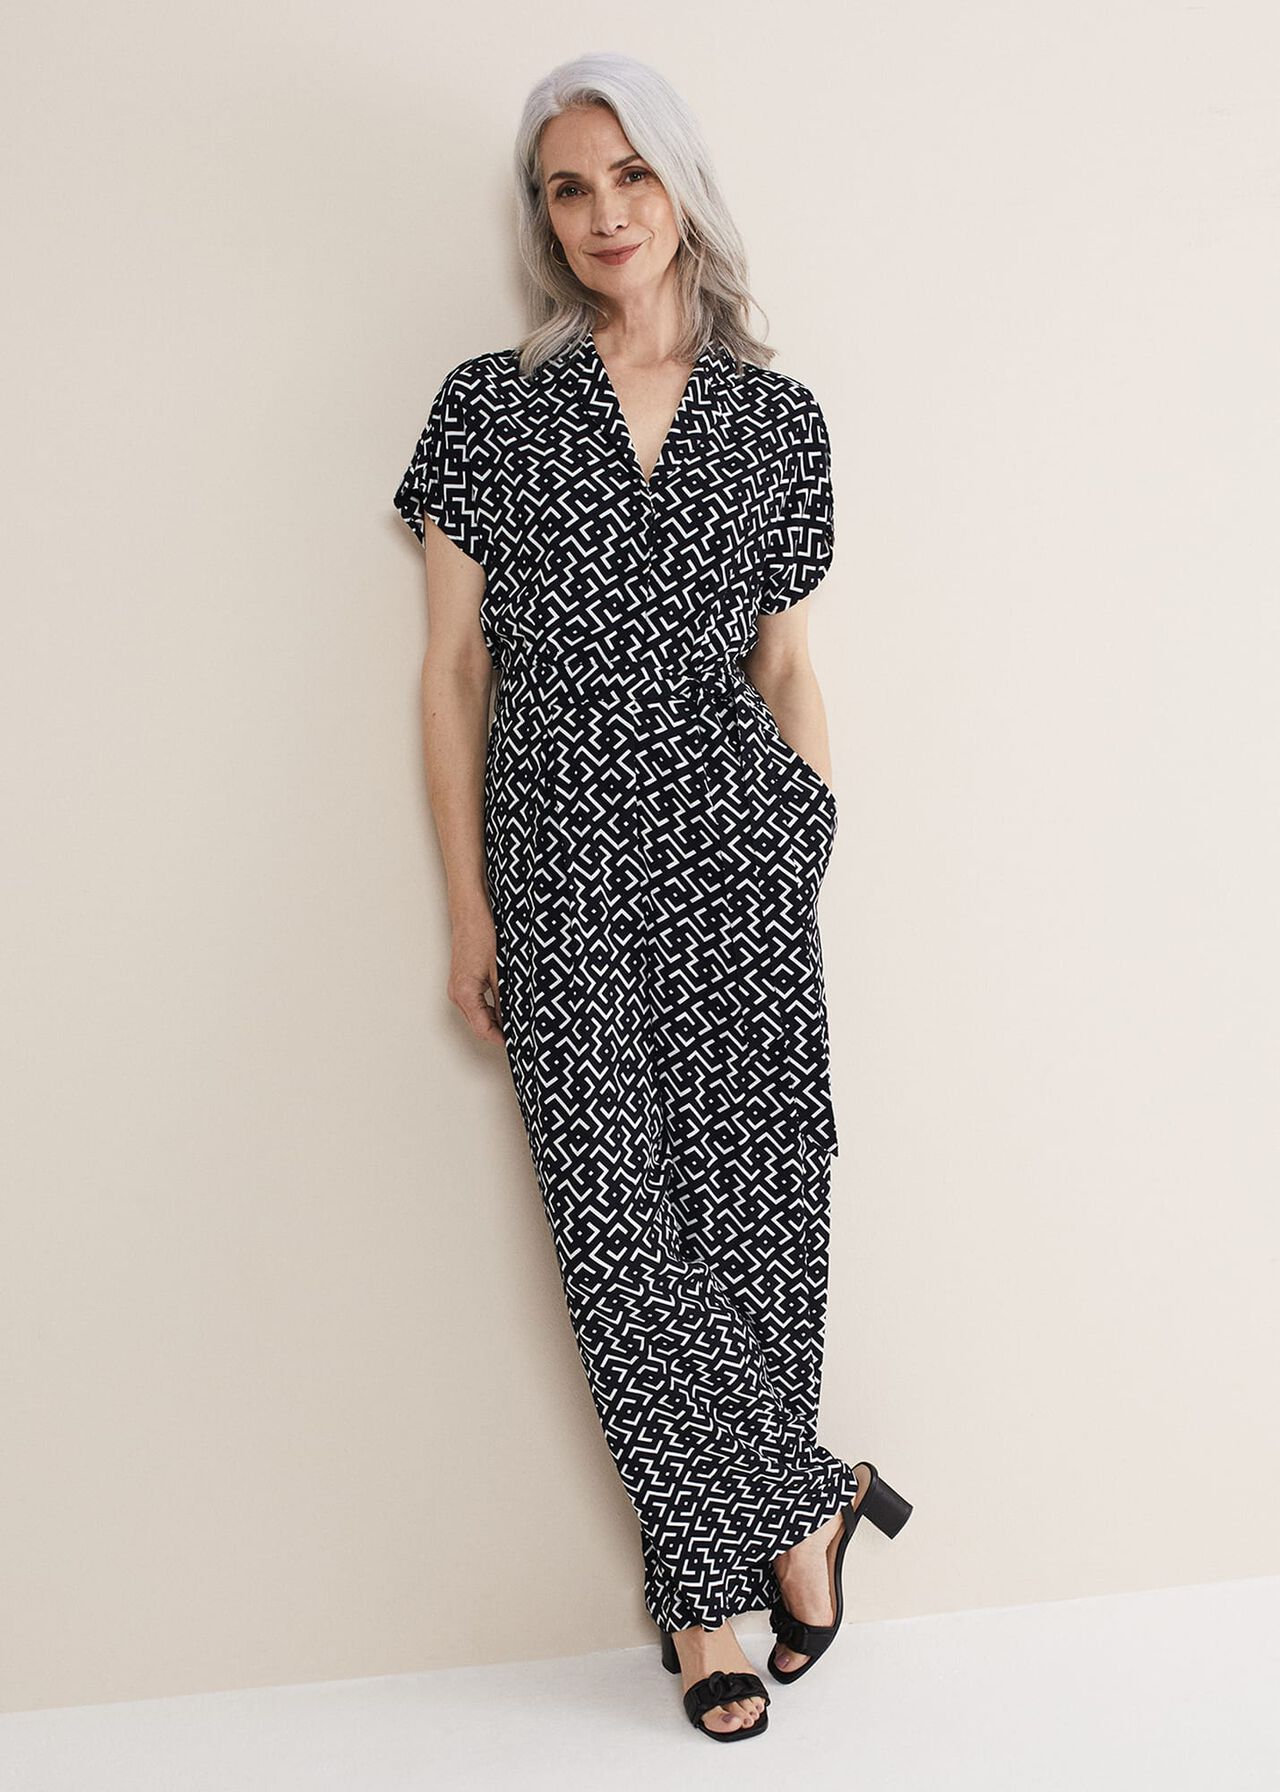 McCall's 6969 - Wide Leg Jumpsuit - Pattern Review – Anita by Design